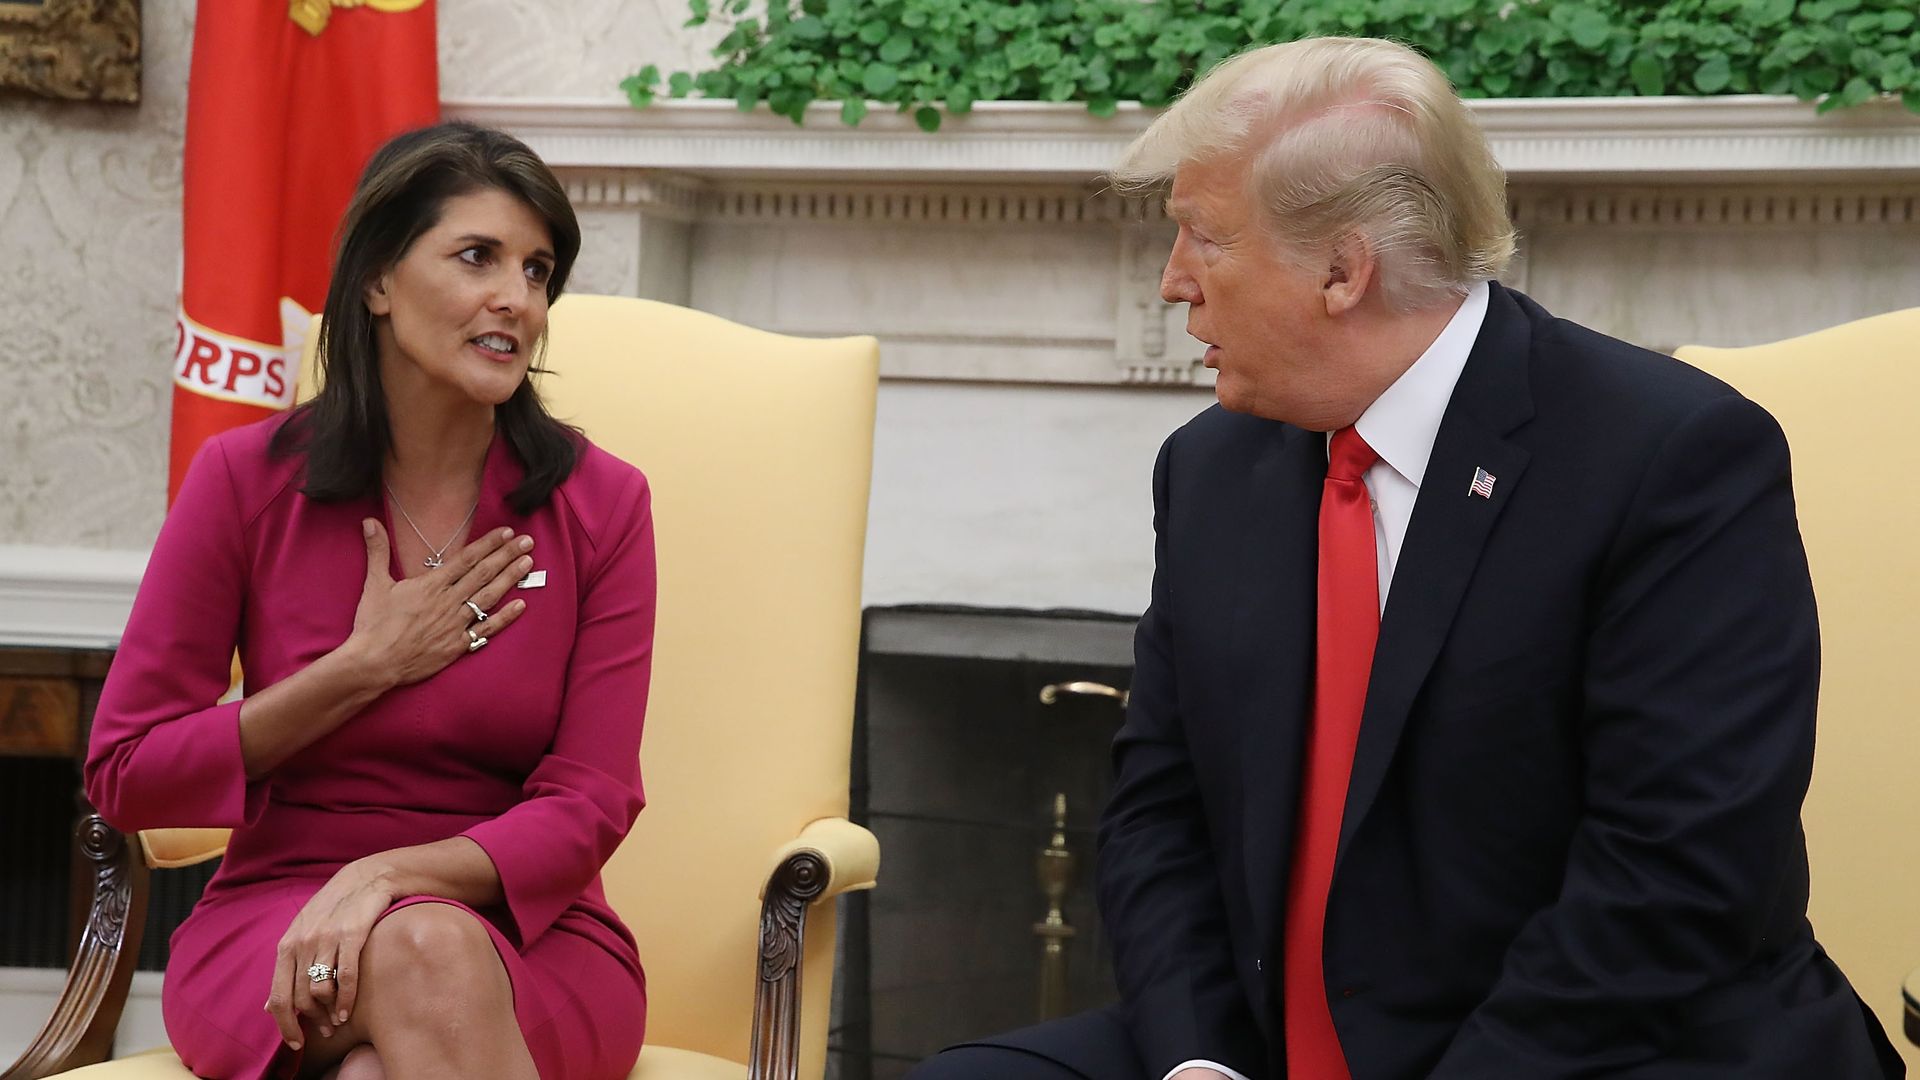 Nikki Haley and Trump in Oval Office